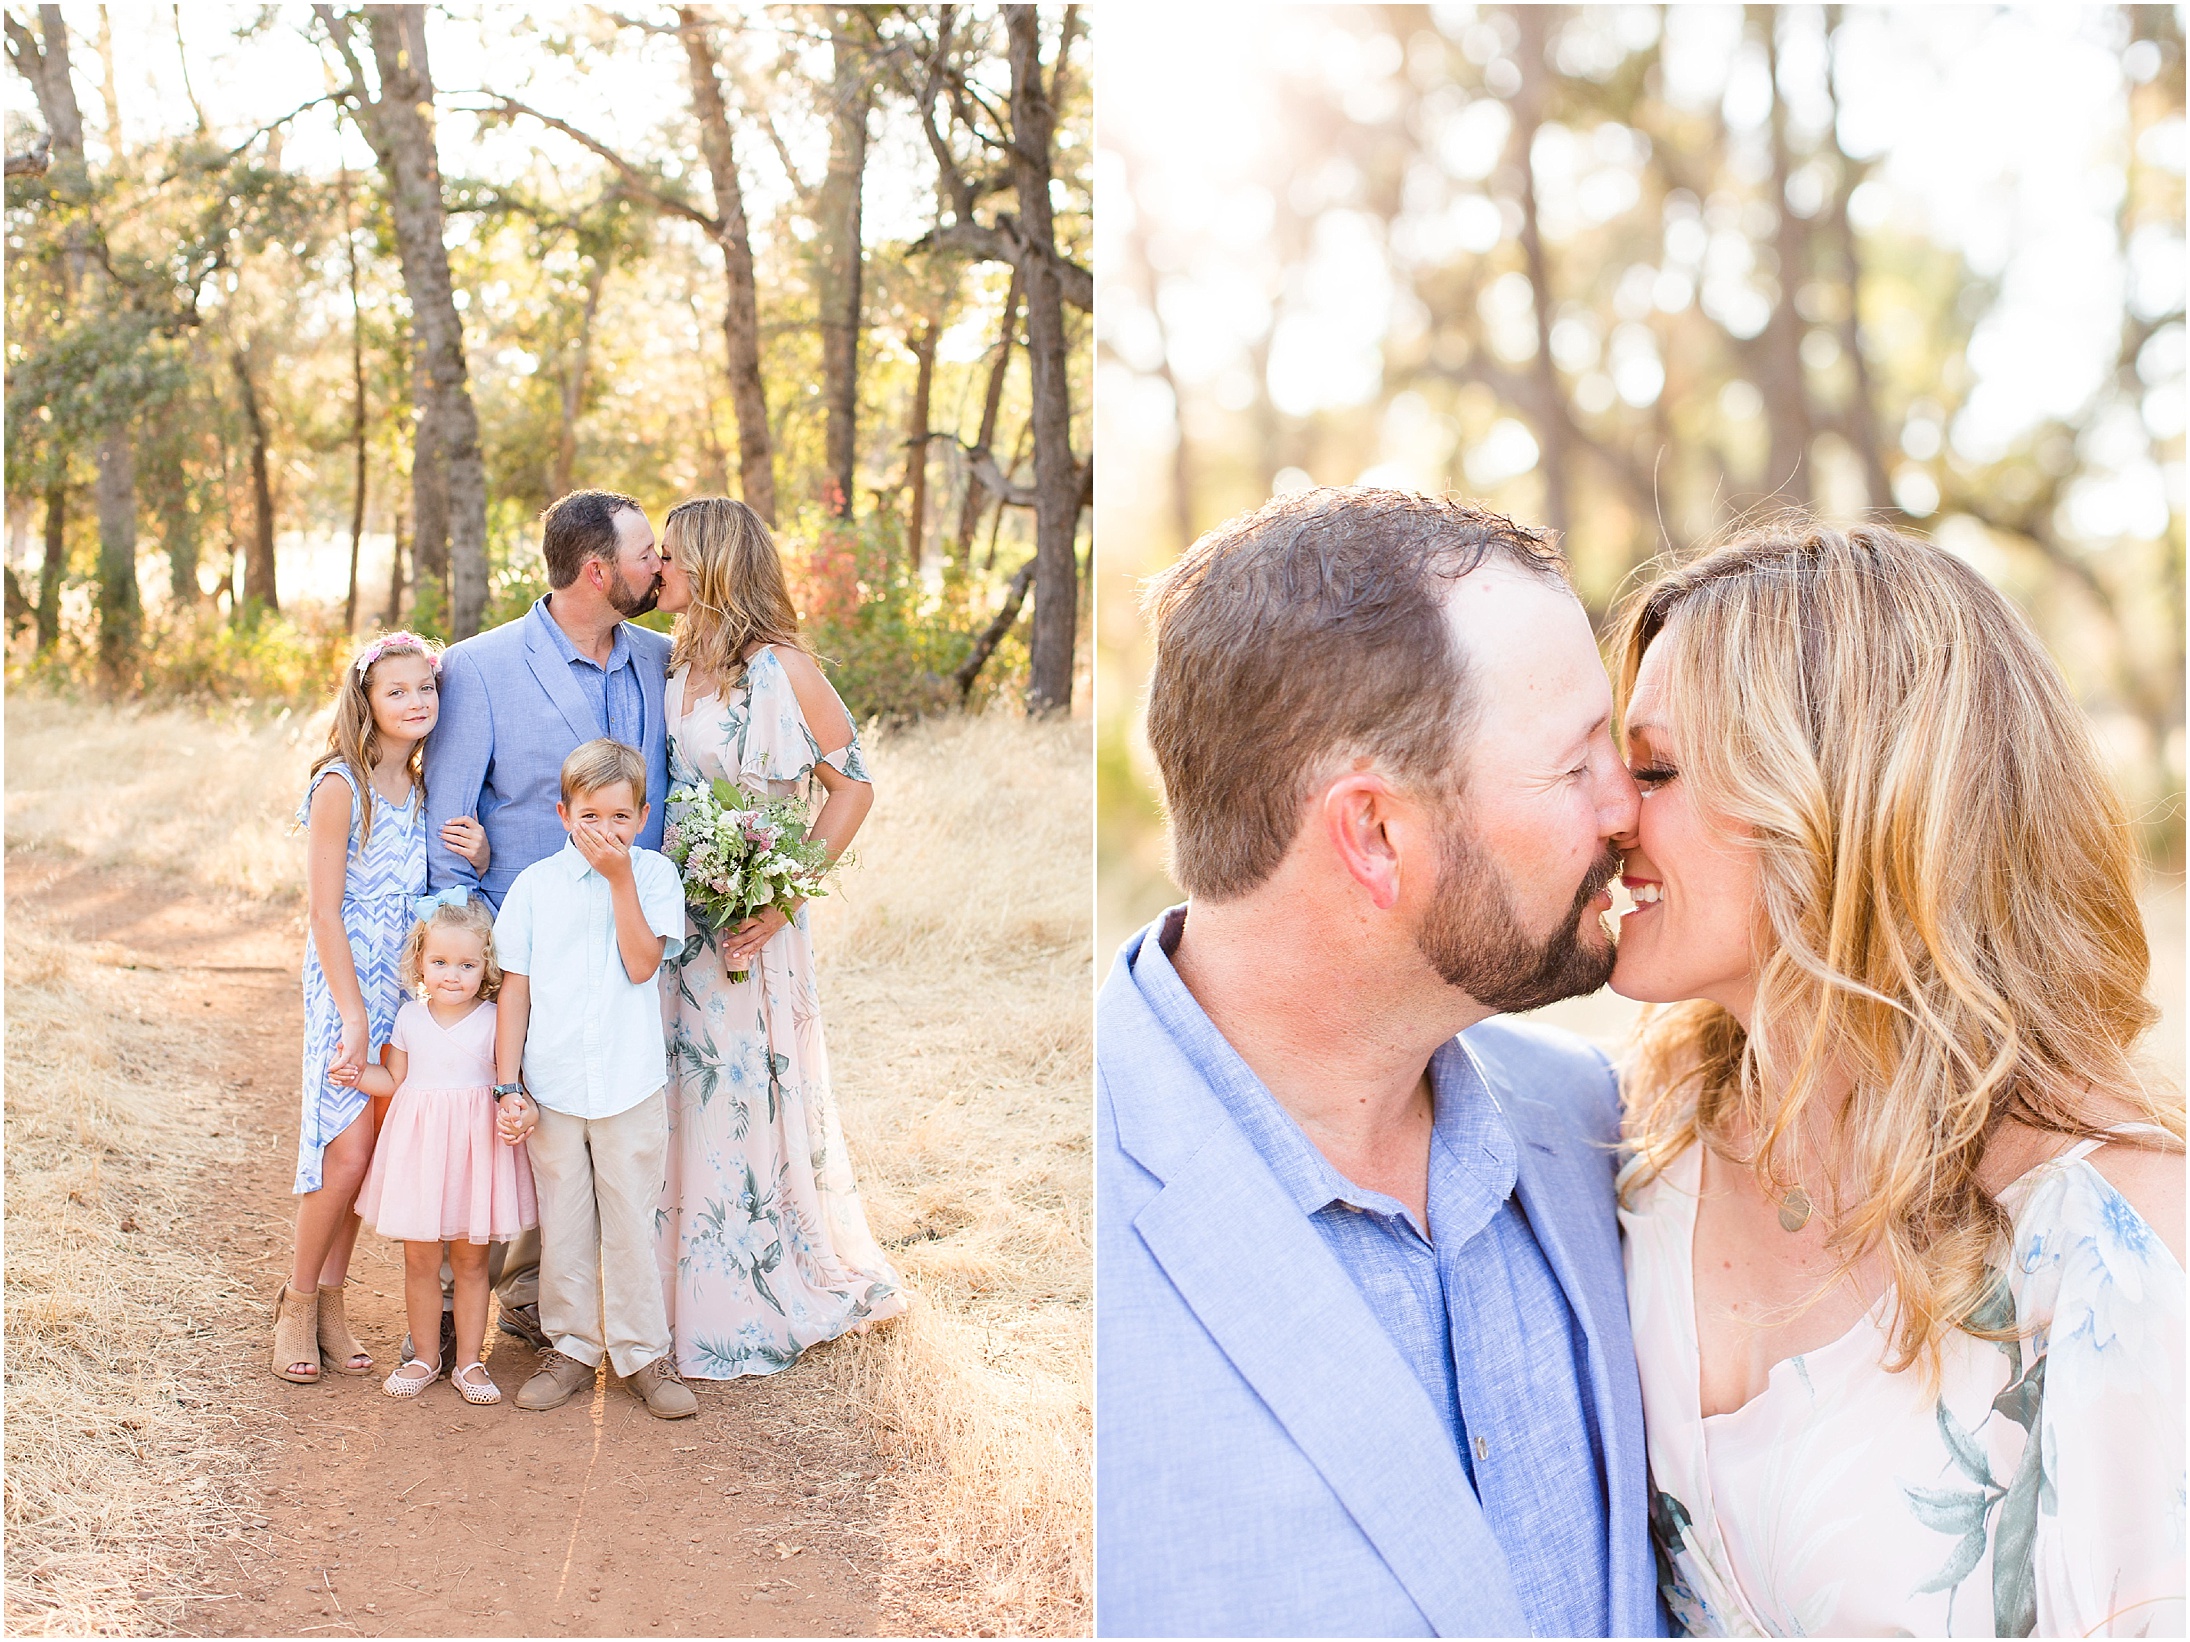 Upper Bidwell Park Twelve Year Anniversary Session Amber Enos Photography Chico California,